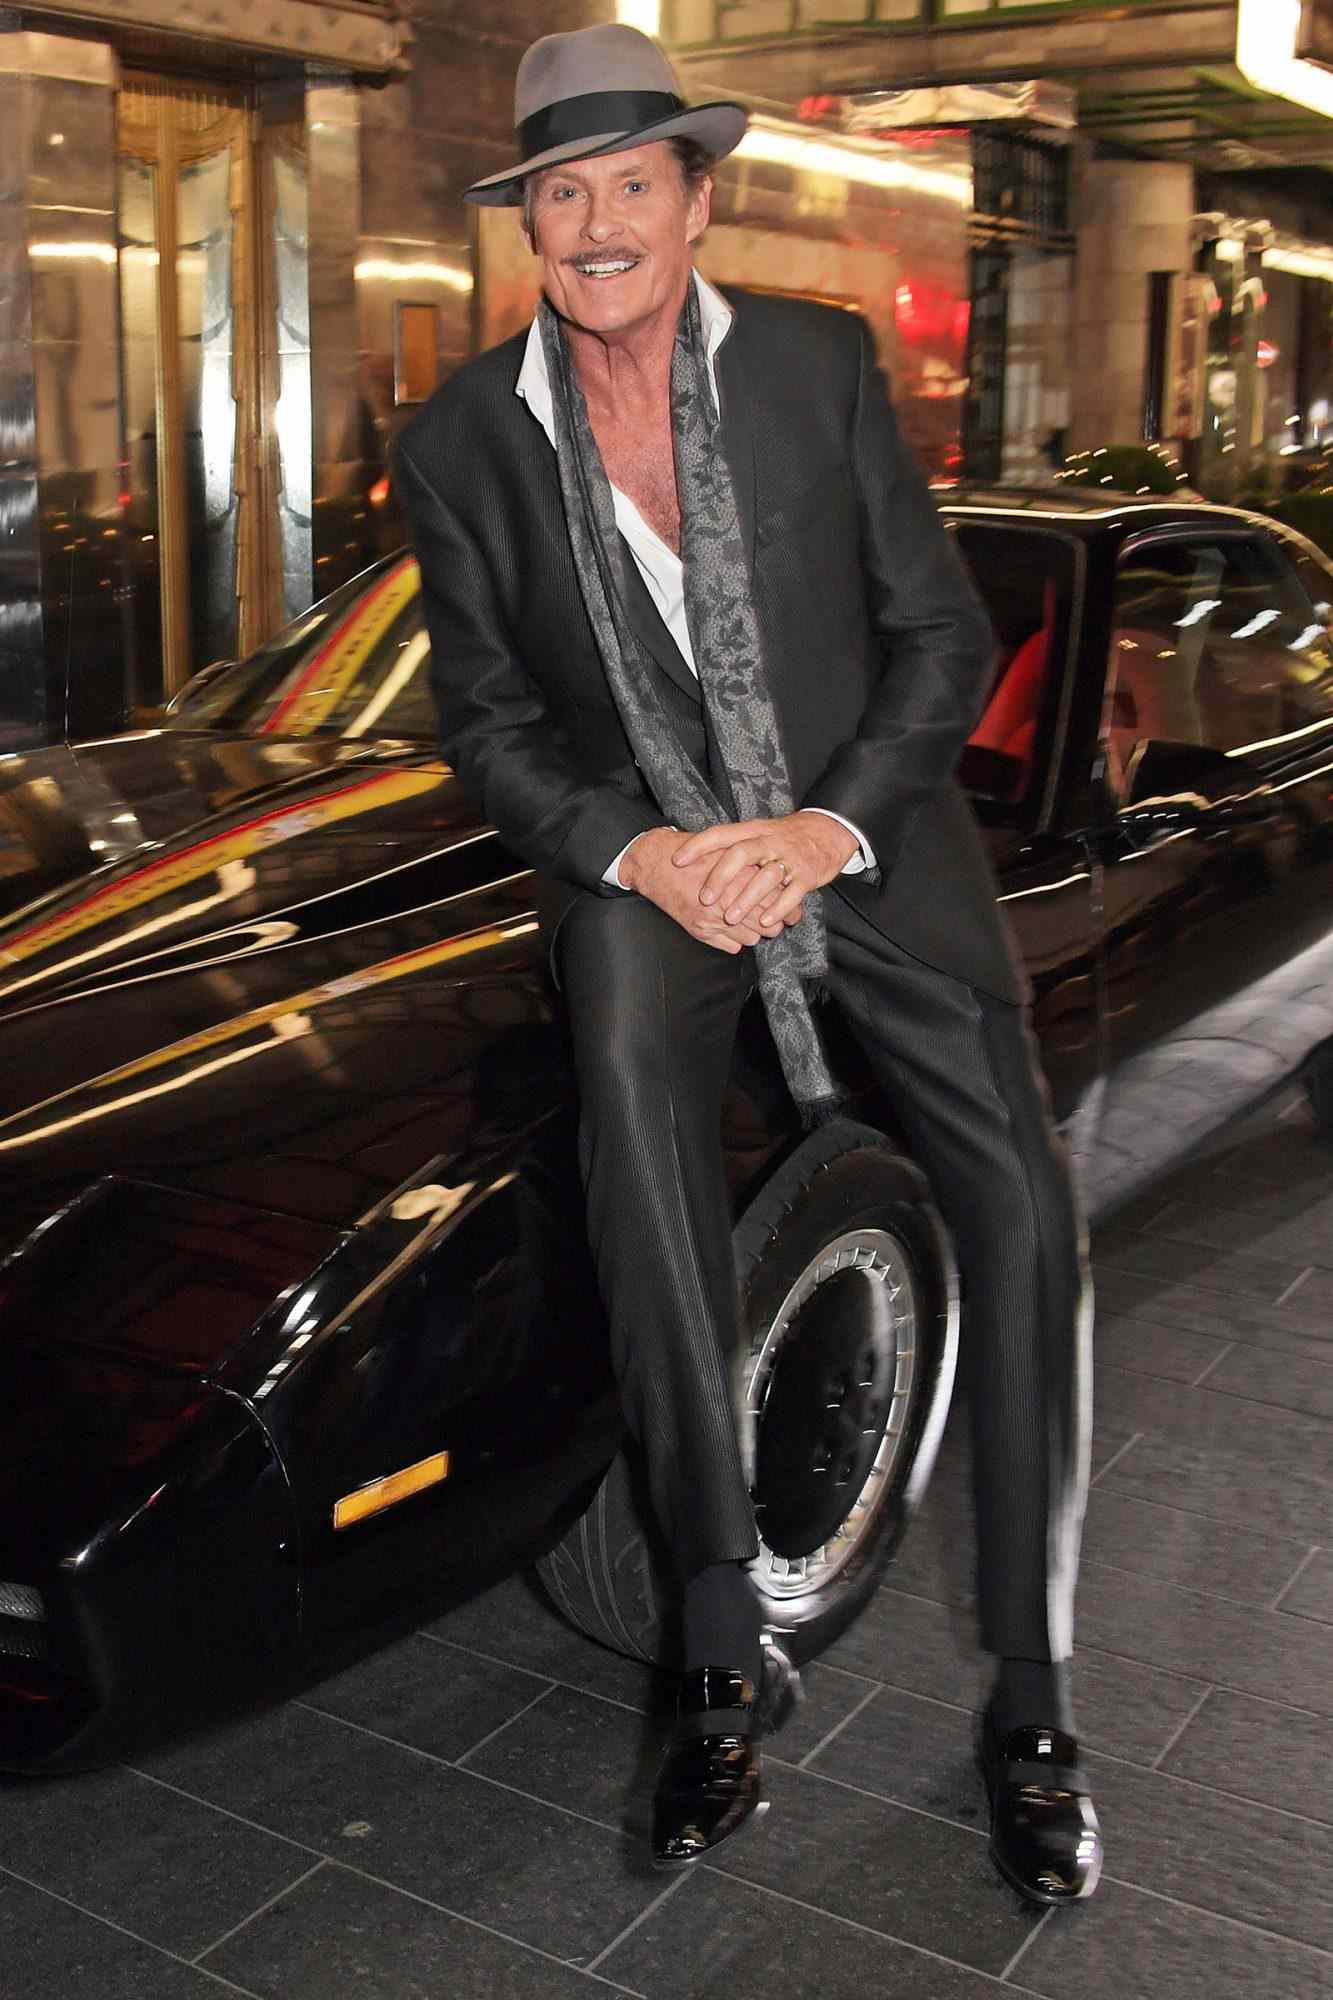 David Hasselhoff poses with KITT from Knight Rider at the gala party to celebrate David Hasselhoff joining the cast of the West End production of "9 To 5: The Musical" at The Savoy Theatre on December 11, 2019 in London, England